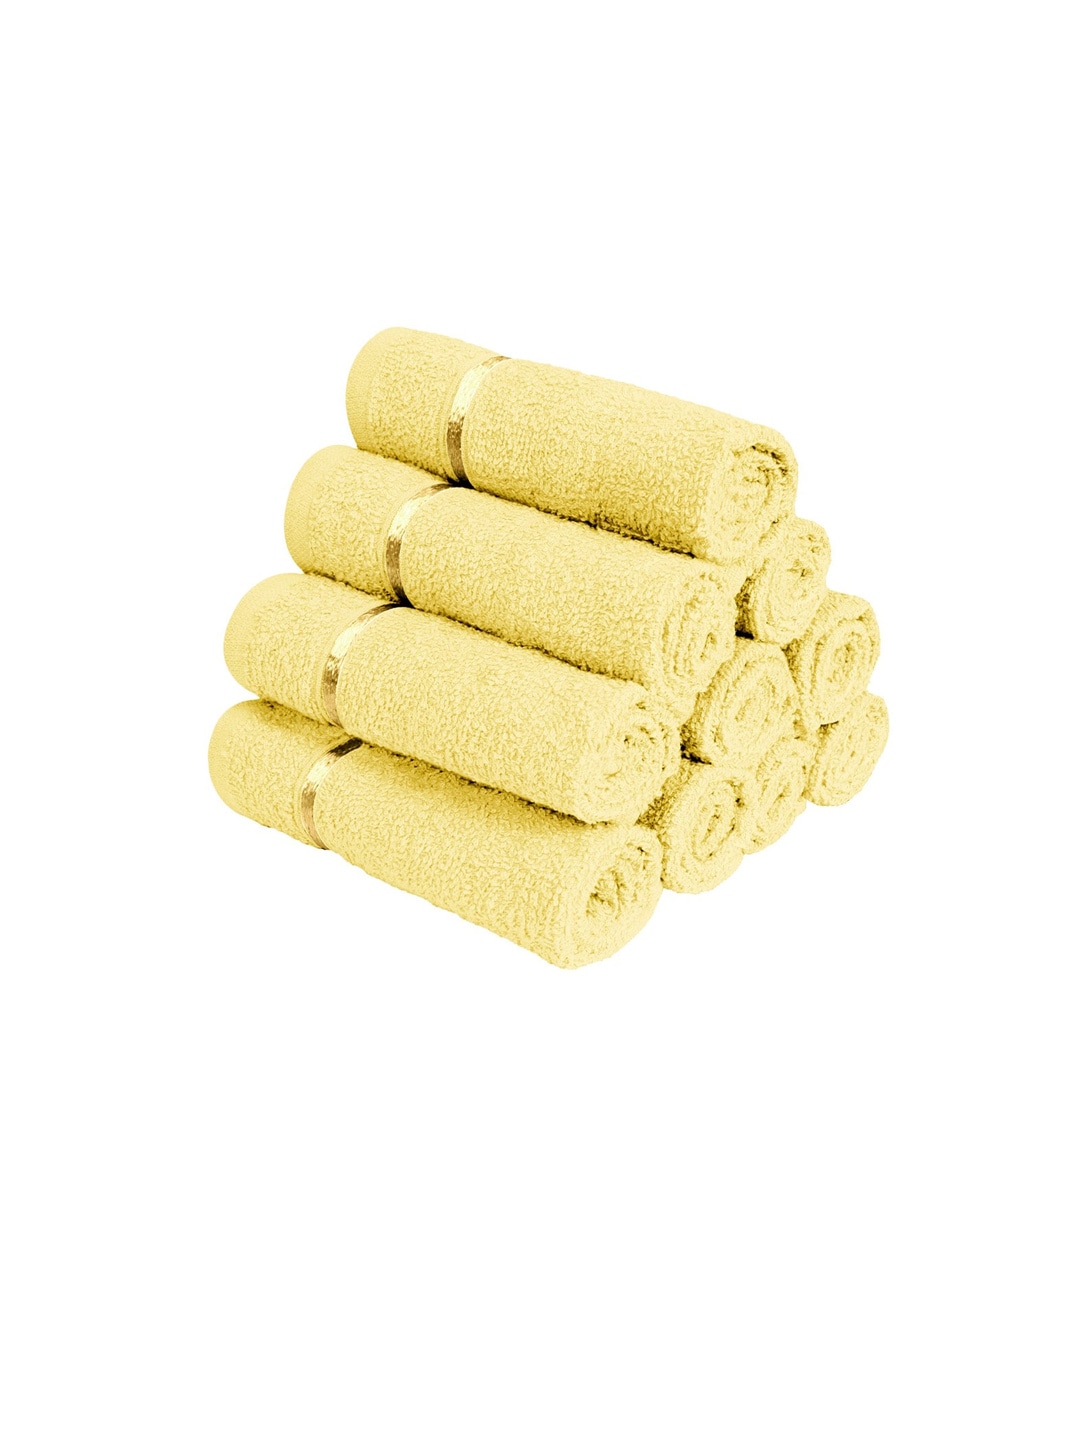 Story@home Set Of 10 Solid 450 GSM Pure Cotton Face Towels Price in India